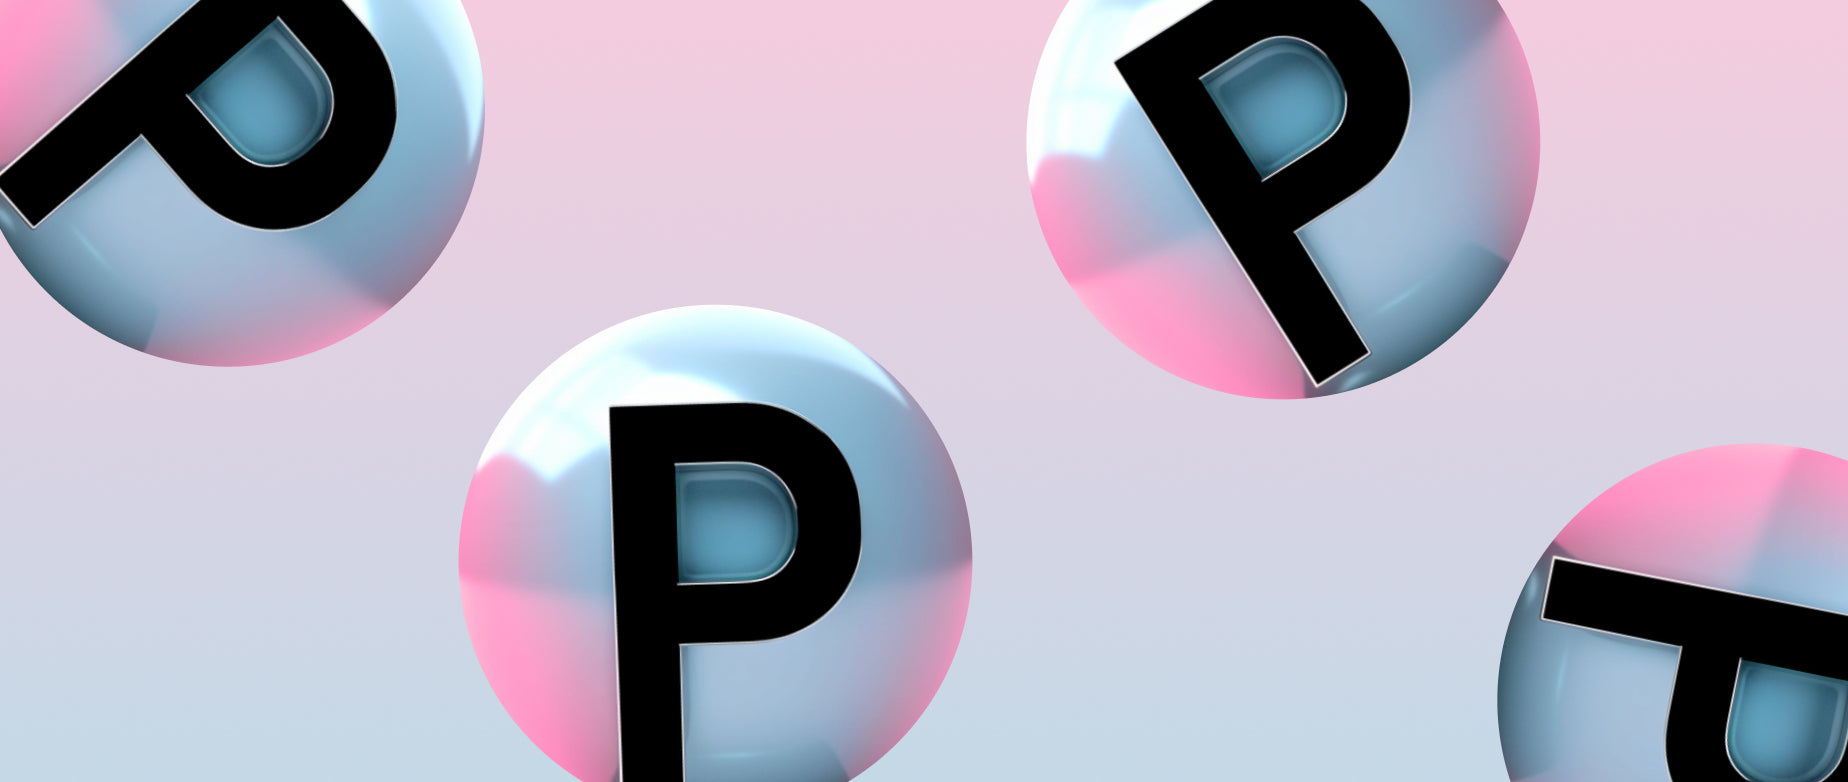 4 floating circles with the letter P in each of them: 4 Ps of marketing